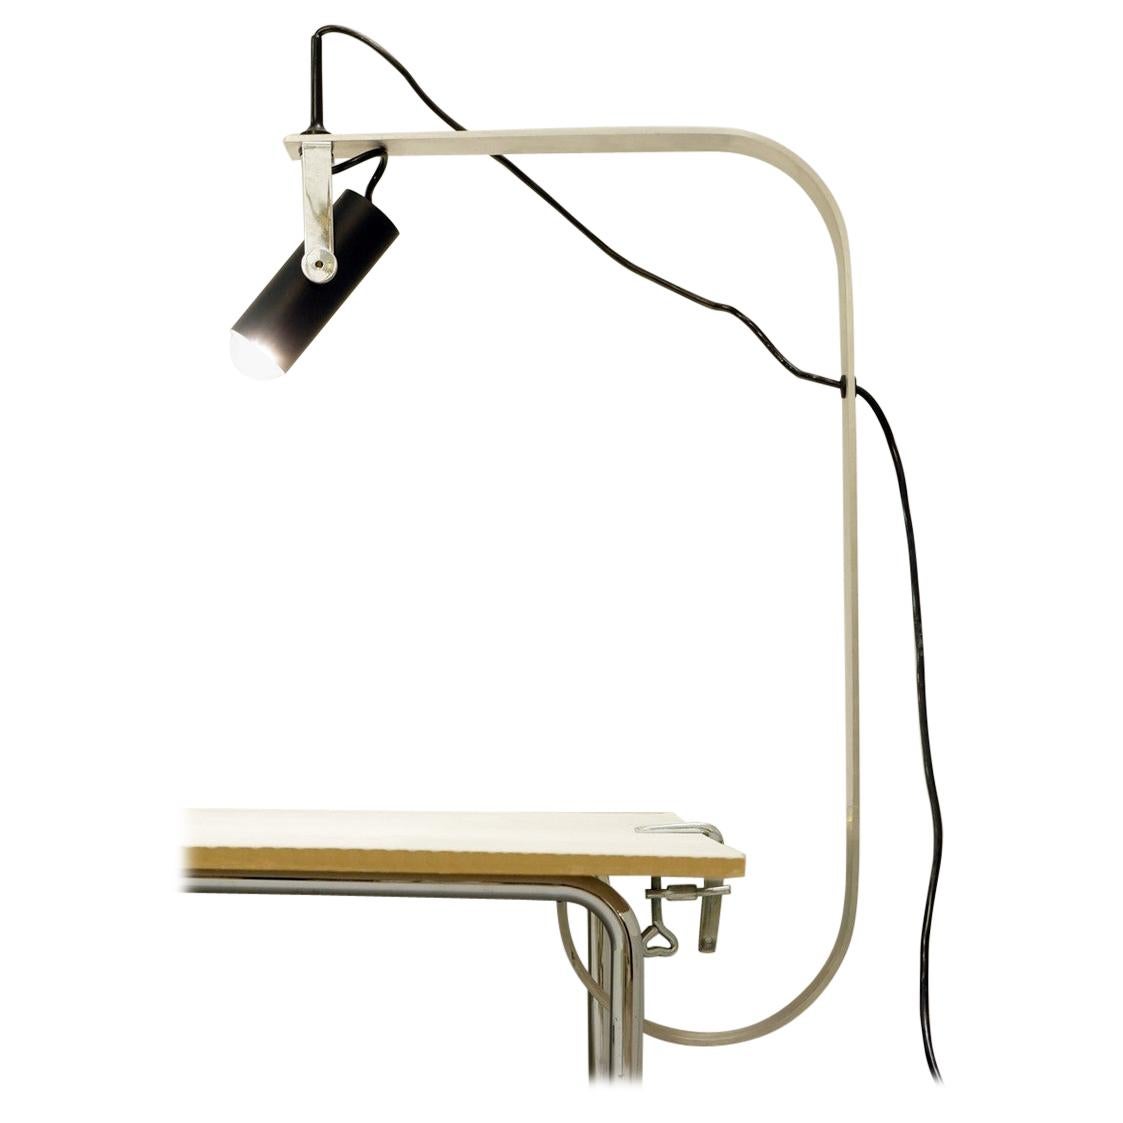 Fontana Desk Lamp with Clamp Base, Italy, 1970s